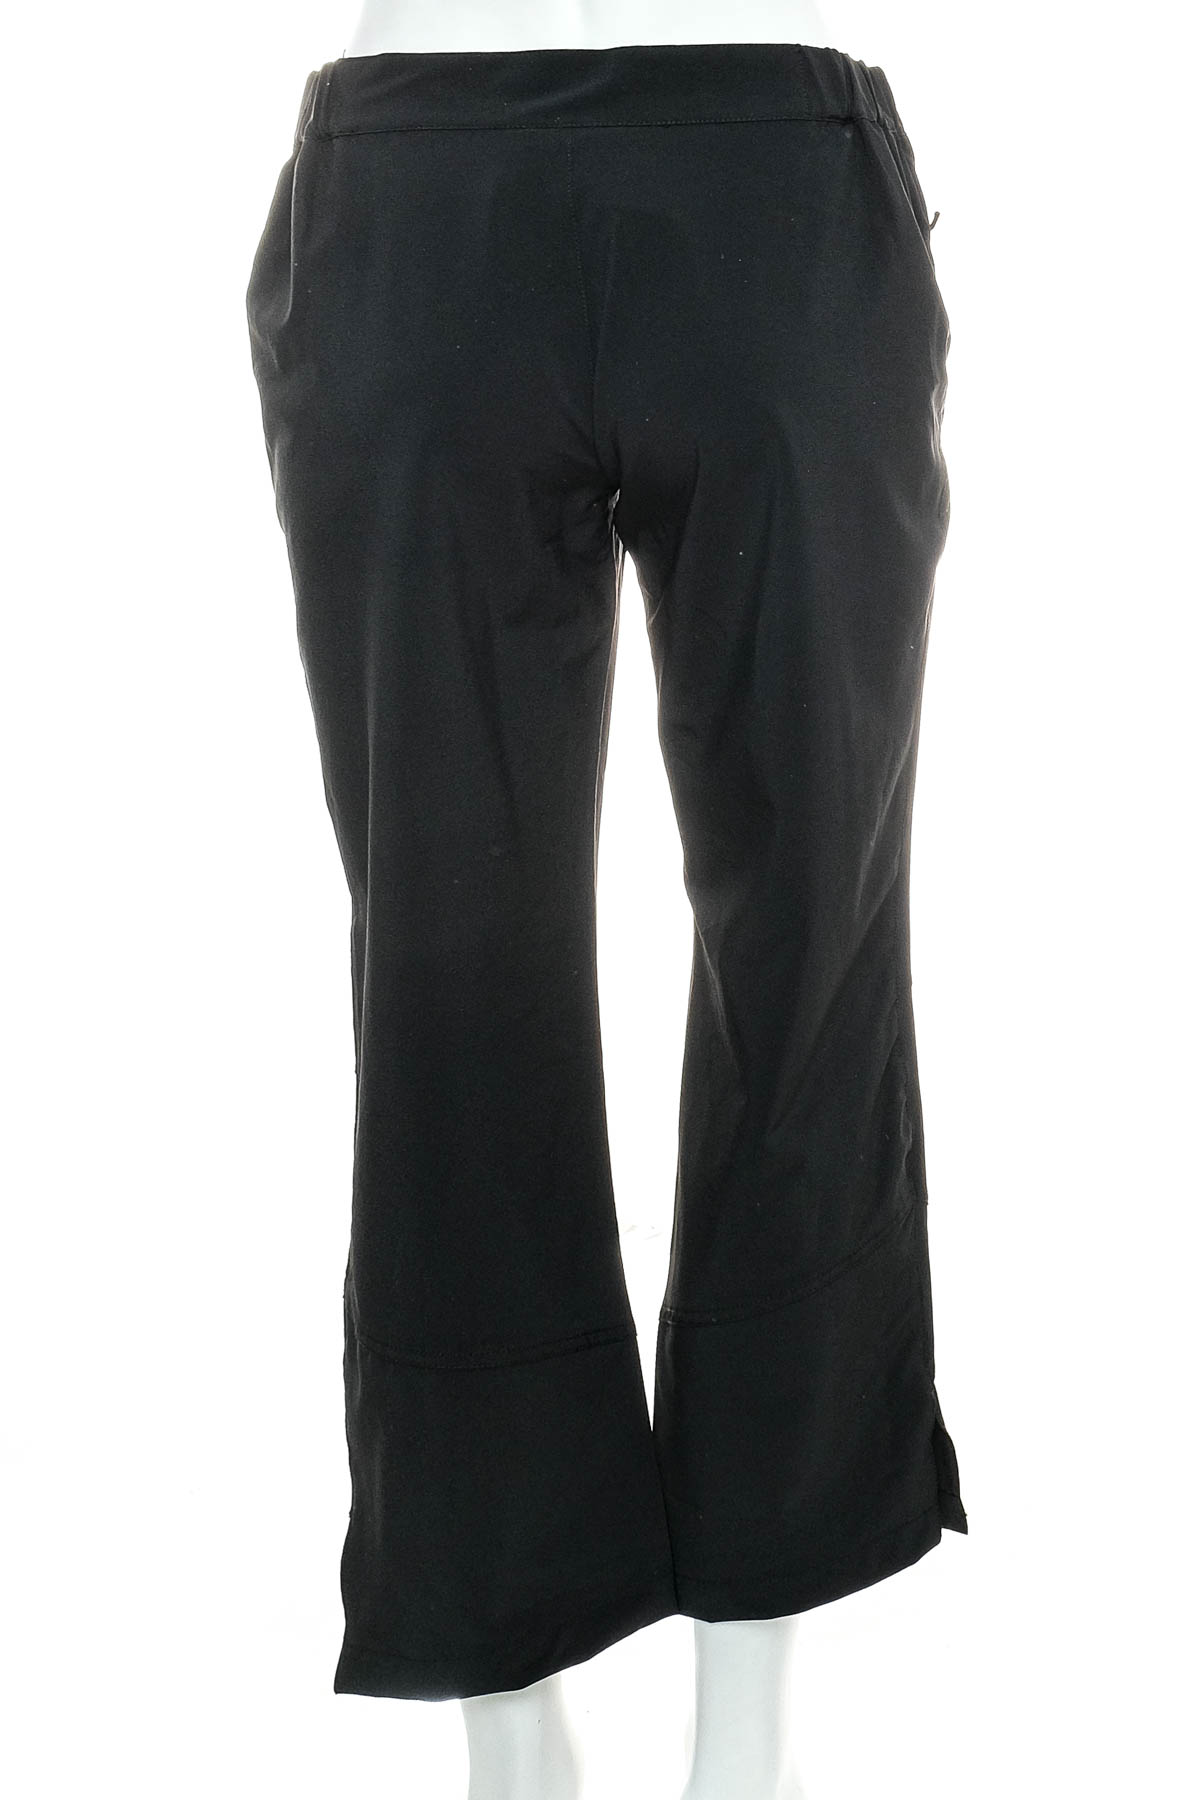 Women's trousers - Sports Edition - 1